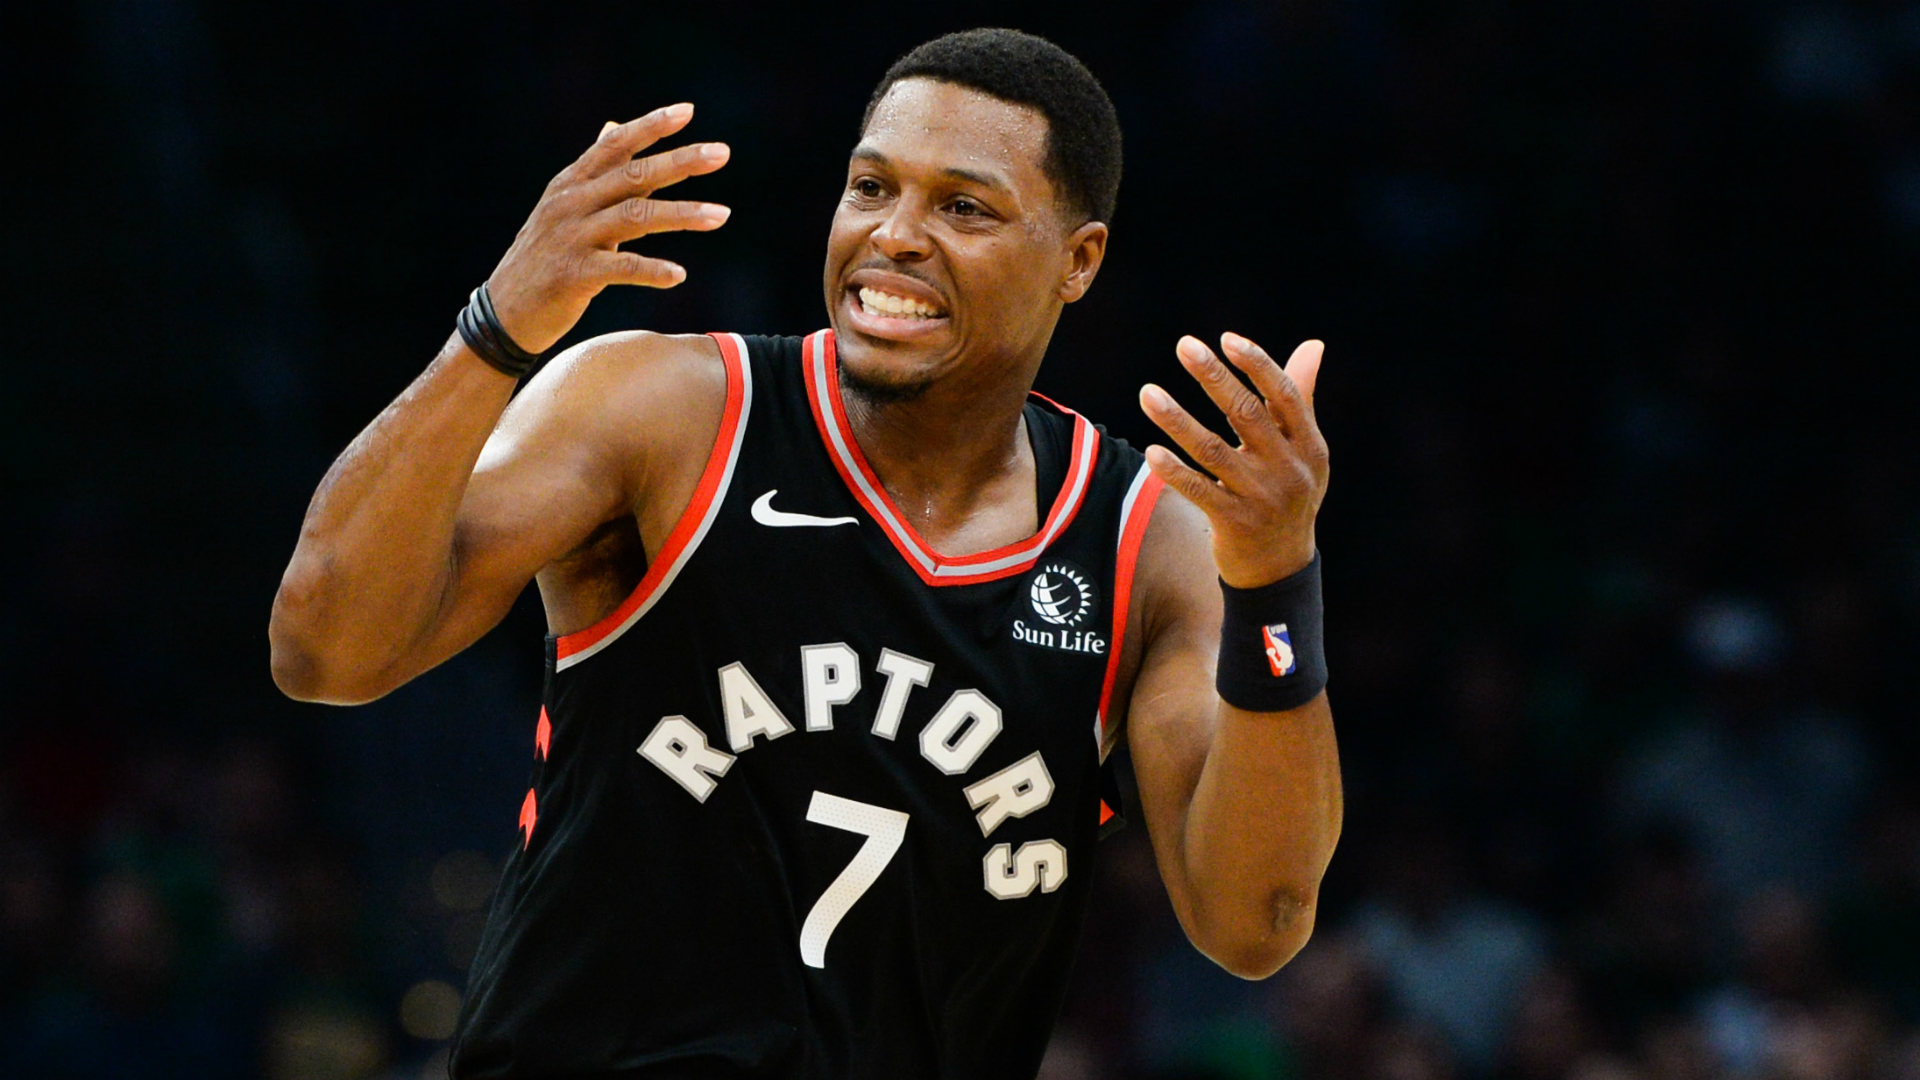 The Raptors' 122-104 road win over the Pelicans came at a cost with injuries suffered by Kyle Lowry and Serge Ibaka.